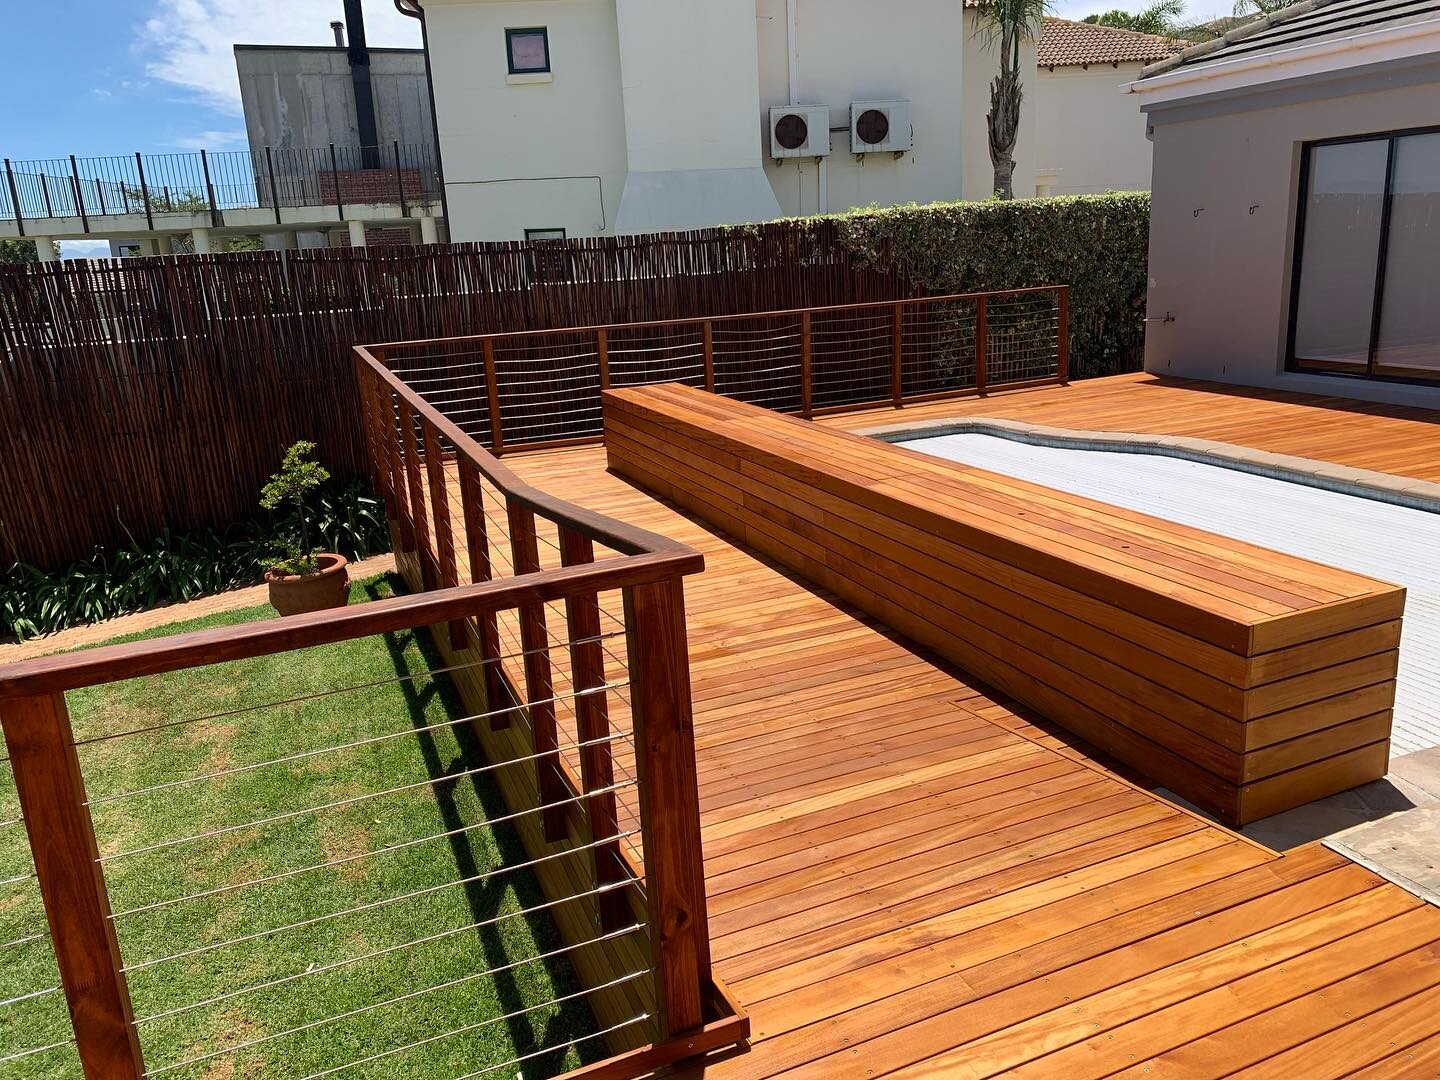 Freshly oiled Garapa deck with a Pine handrail and stainless steel cabling. Our clients were extremely happy with the outcome and we walk away very proud!

#somersetwest #decking #deck #timber #garapa #hardwood #pine #handrail #stainlesssteel #oil